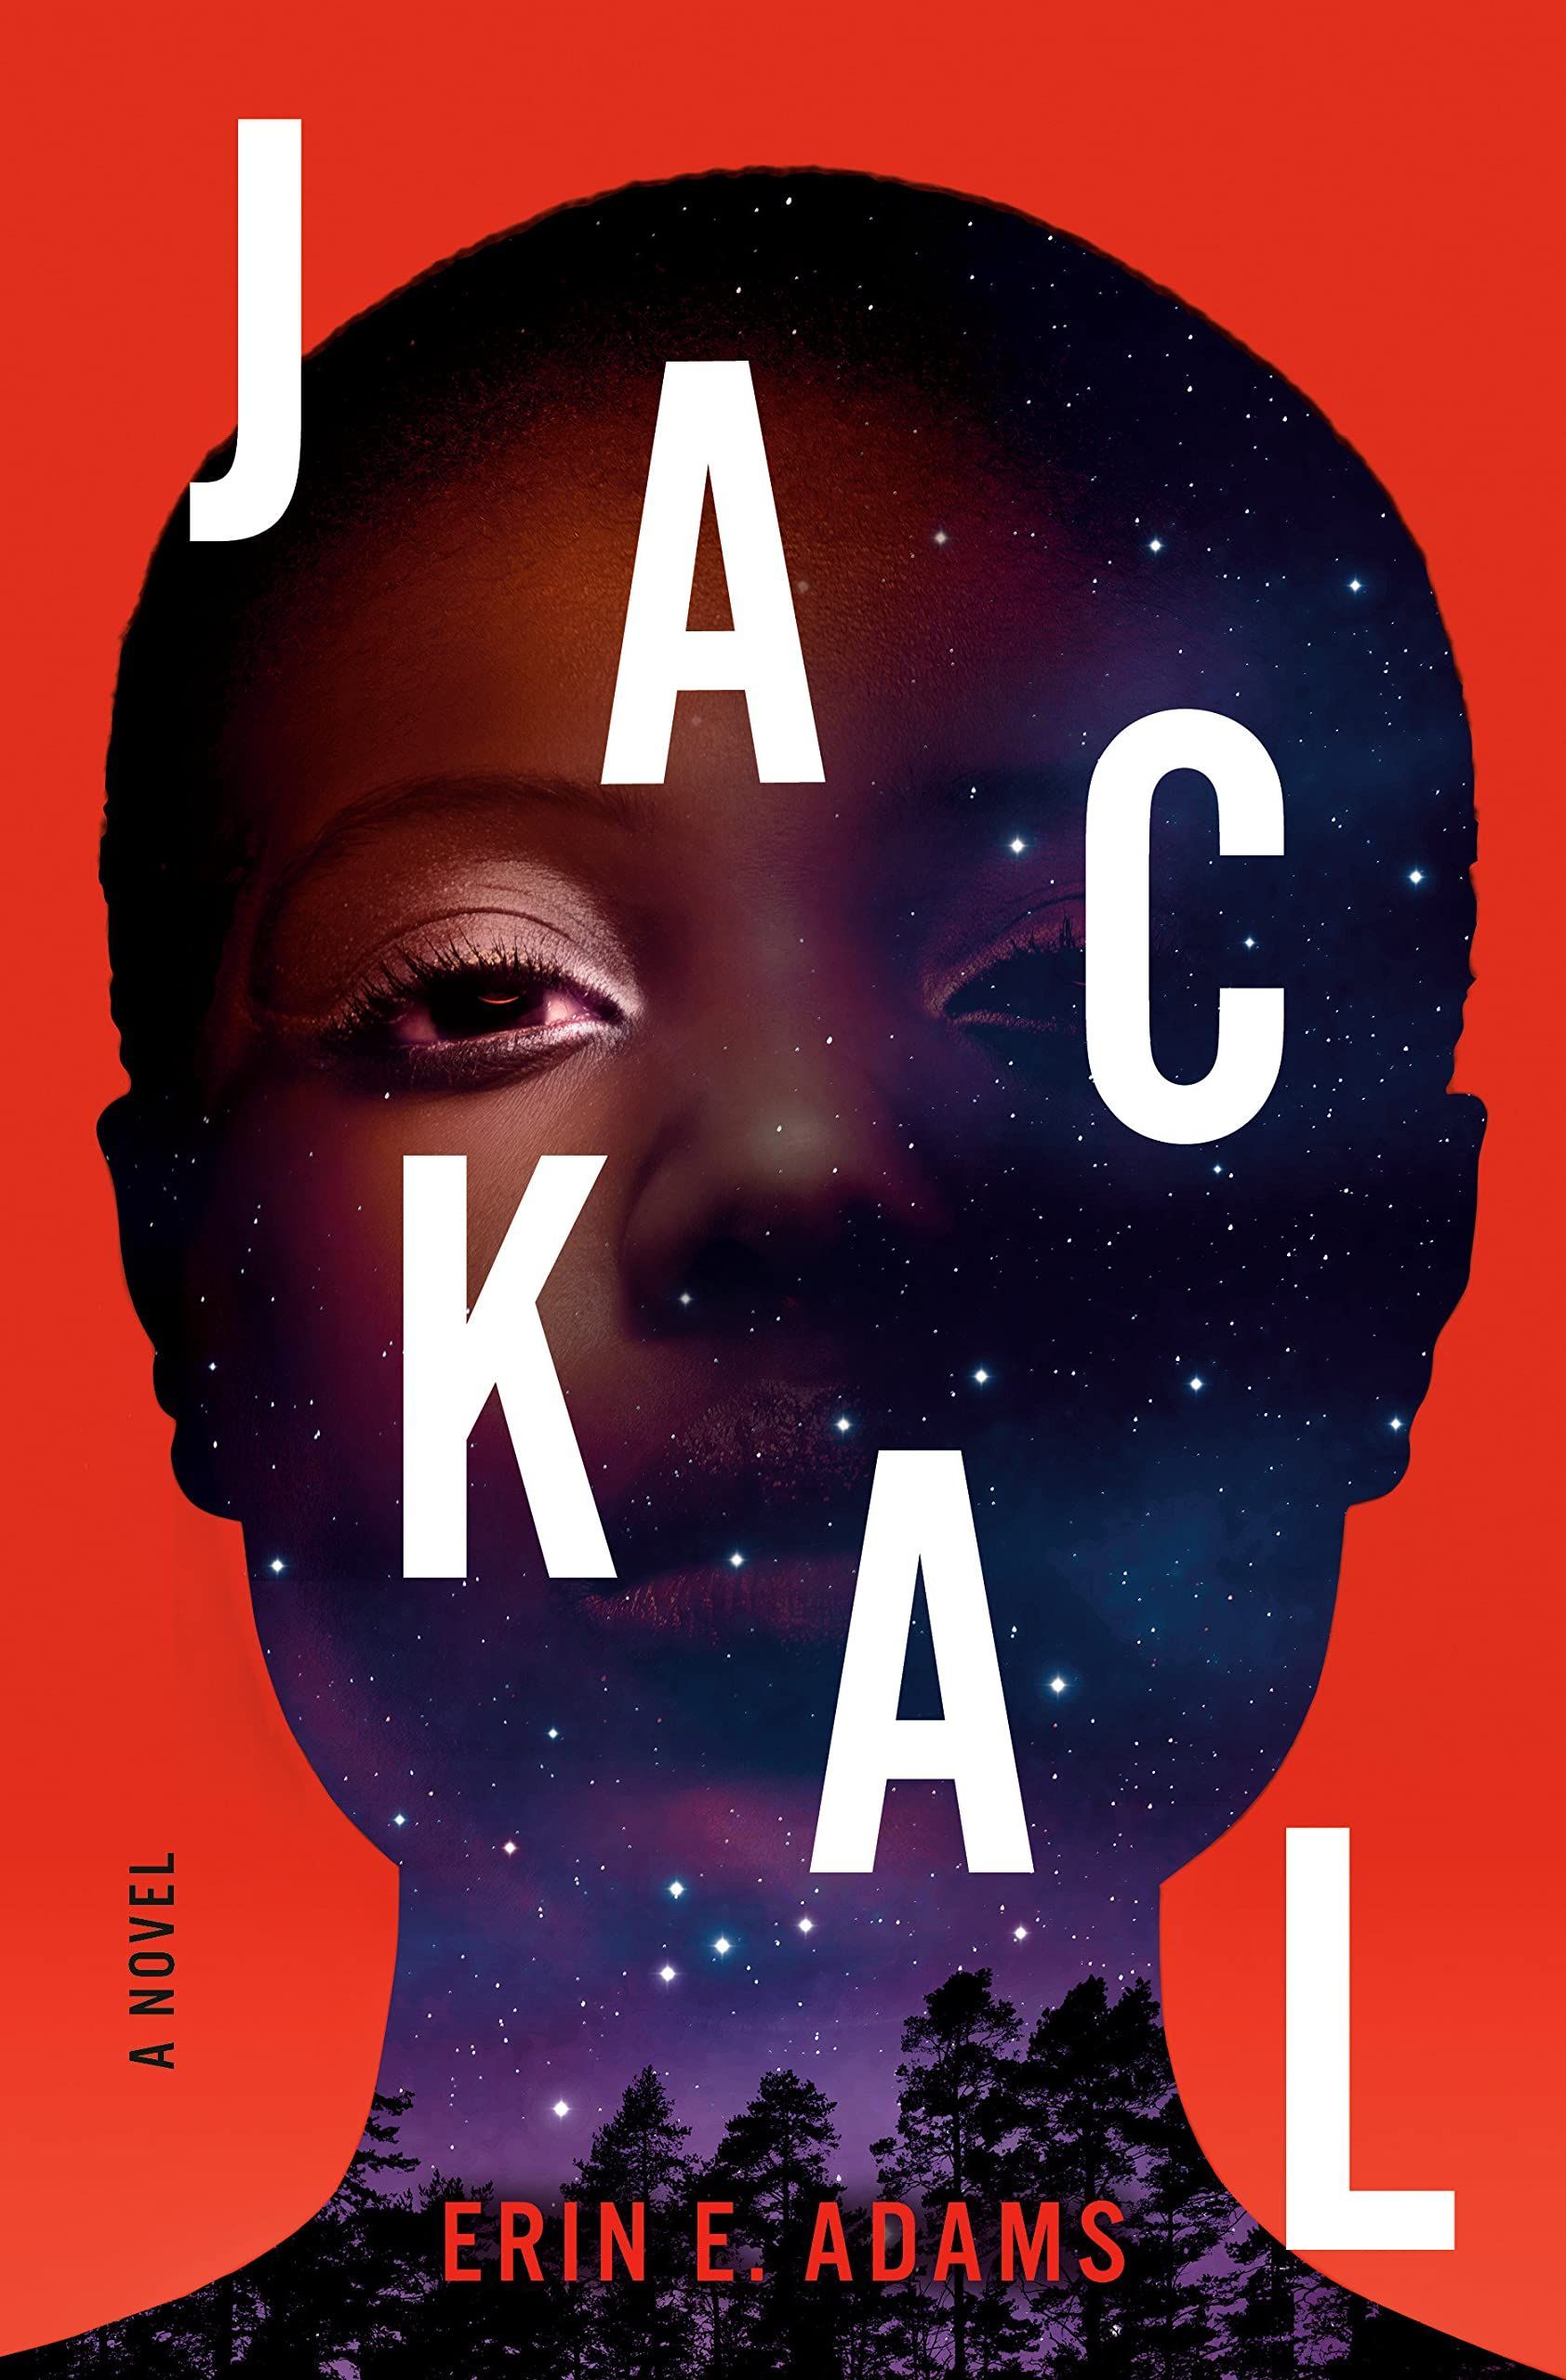 Racial Resentment and the Scavenging Beast: On Erin E. Adams’s “Jackal”